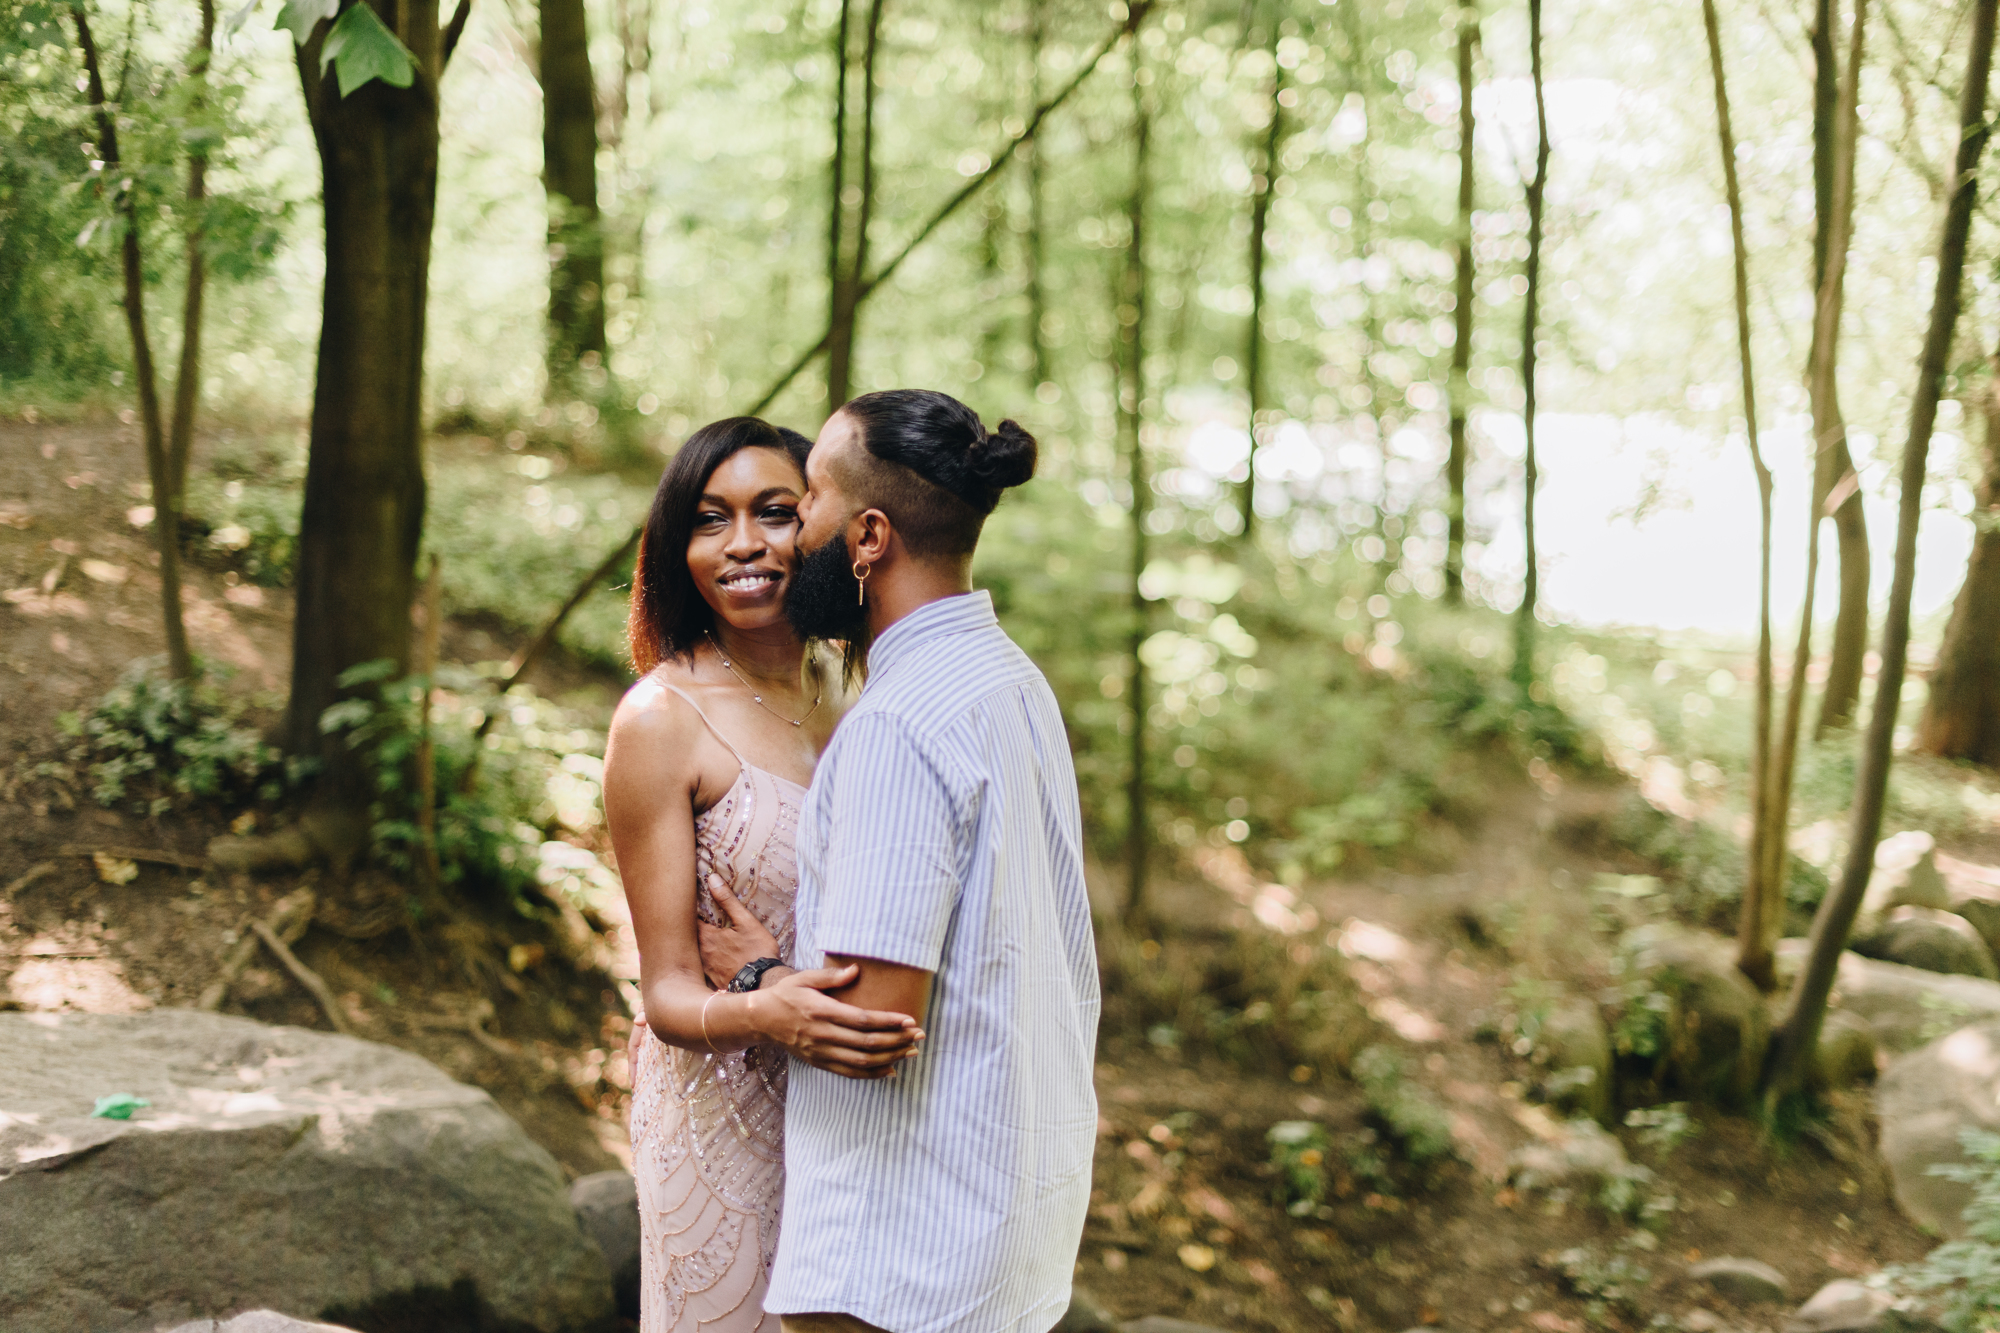 Cheerful Summer Prospect Park Engagement Photography